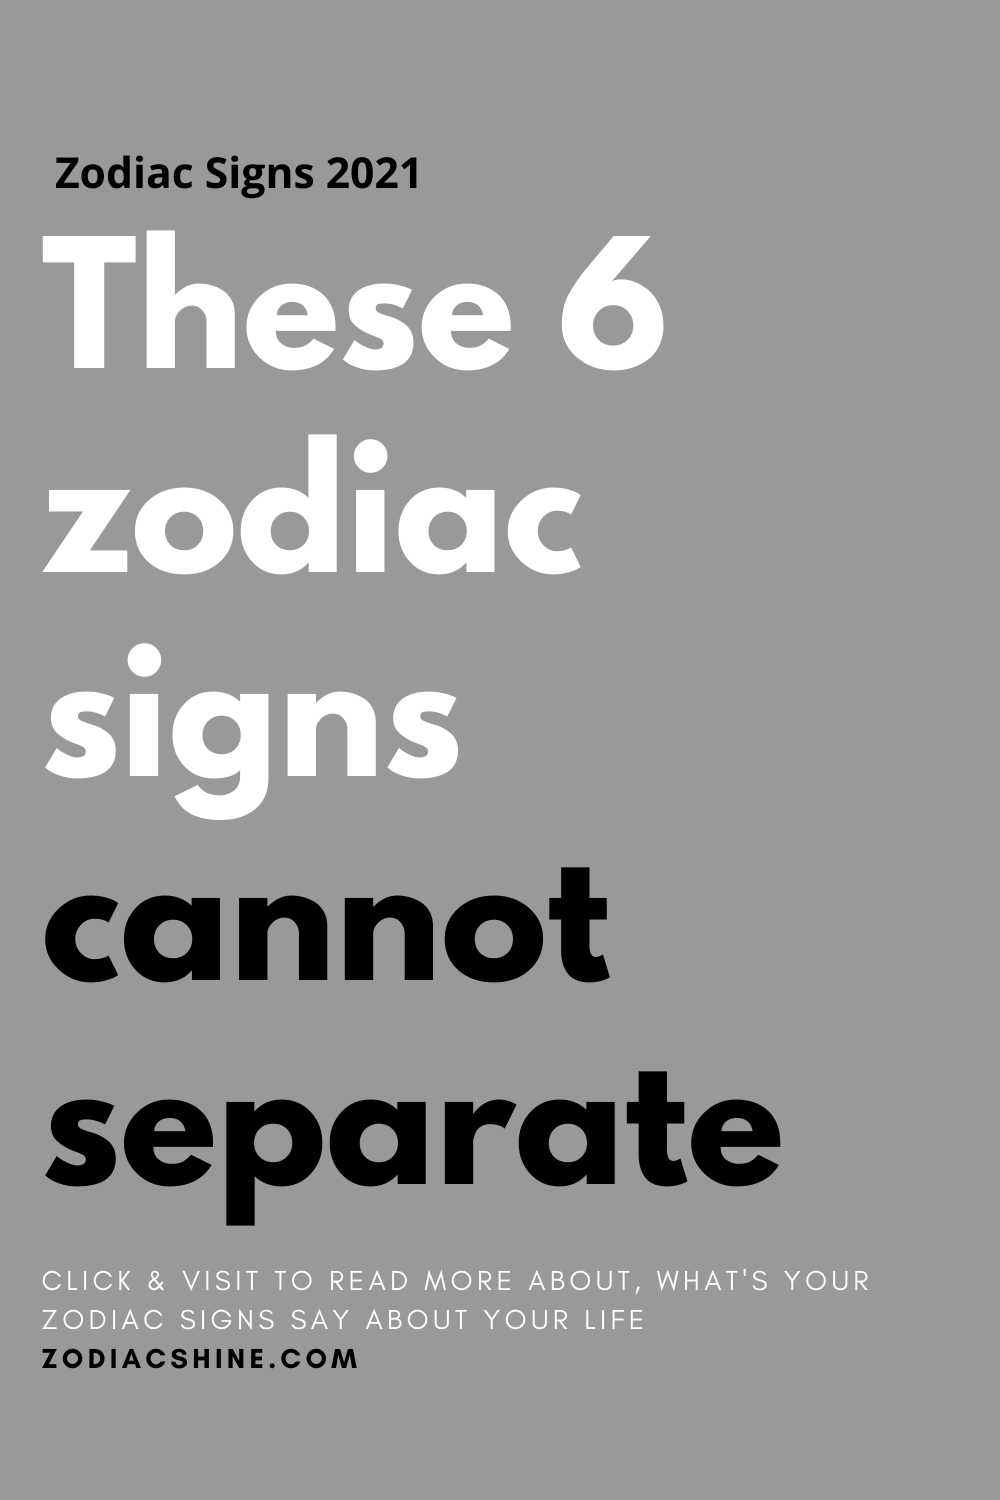 These 6 zodiac signs cannot separate